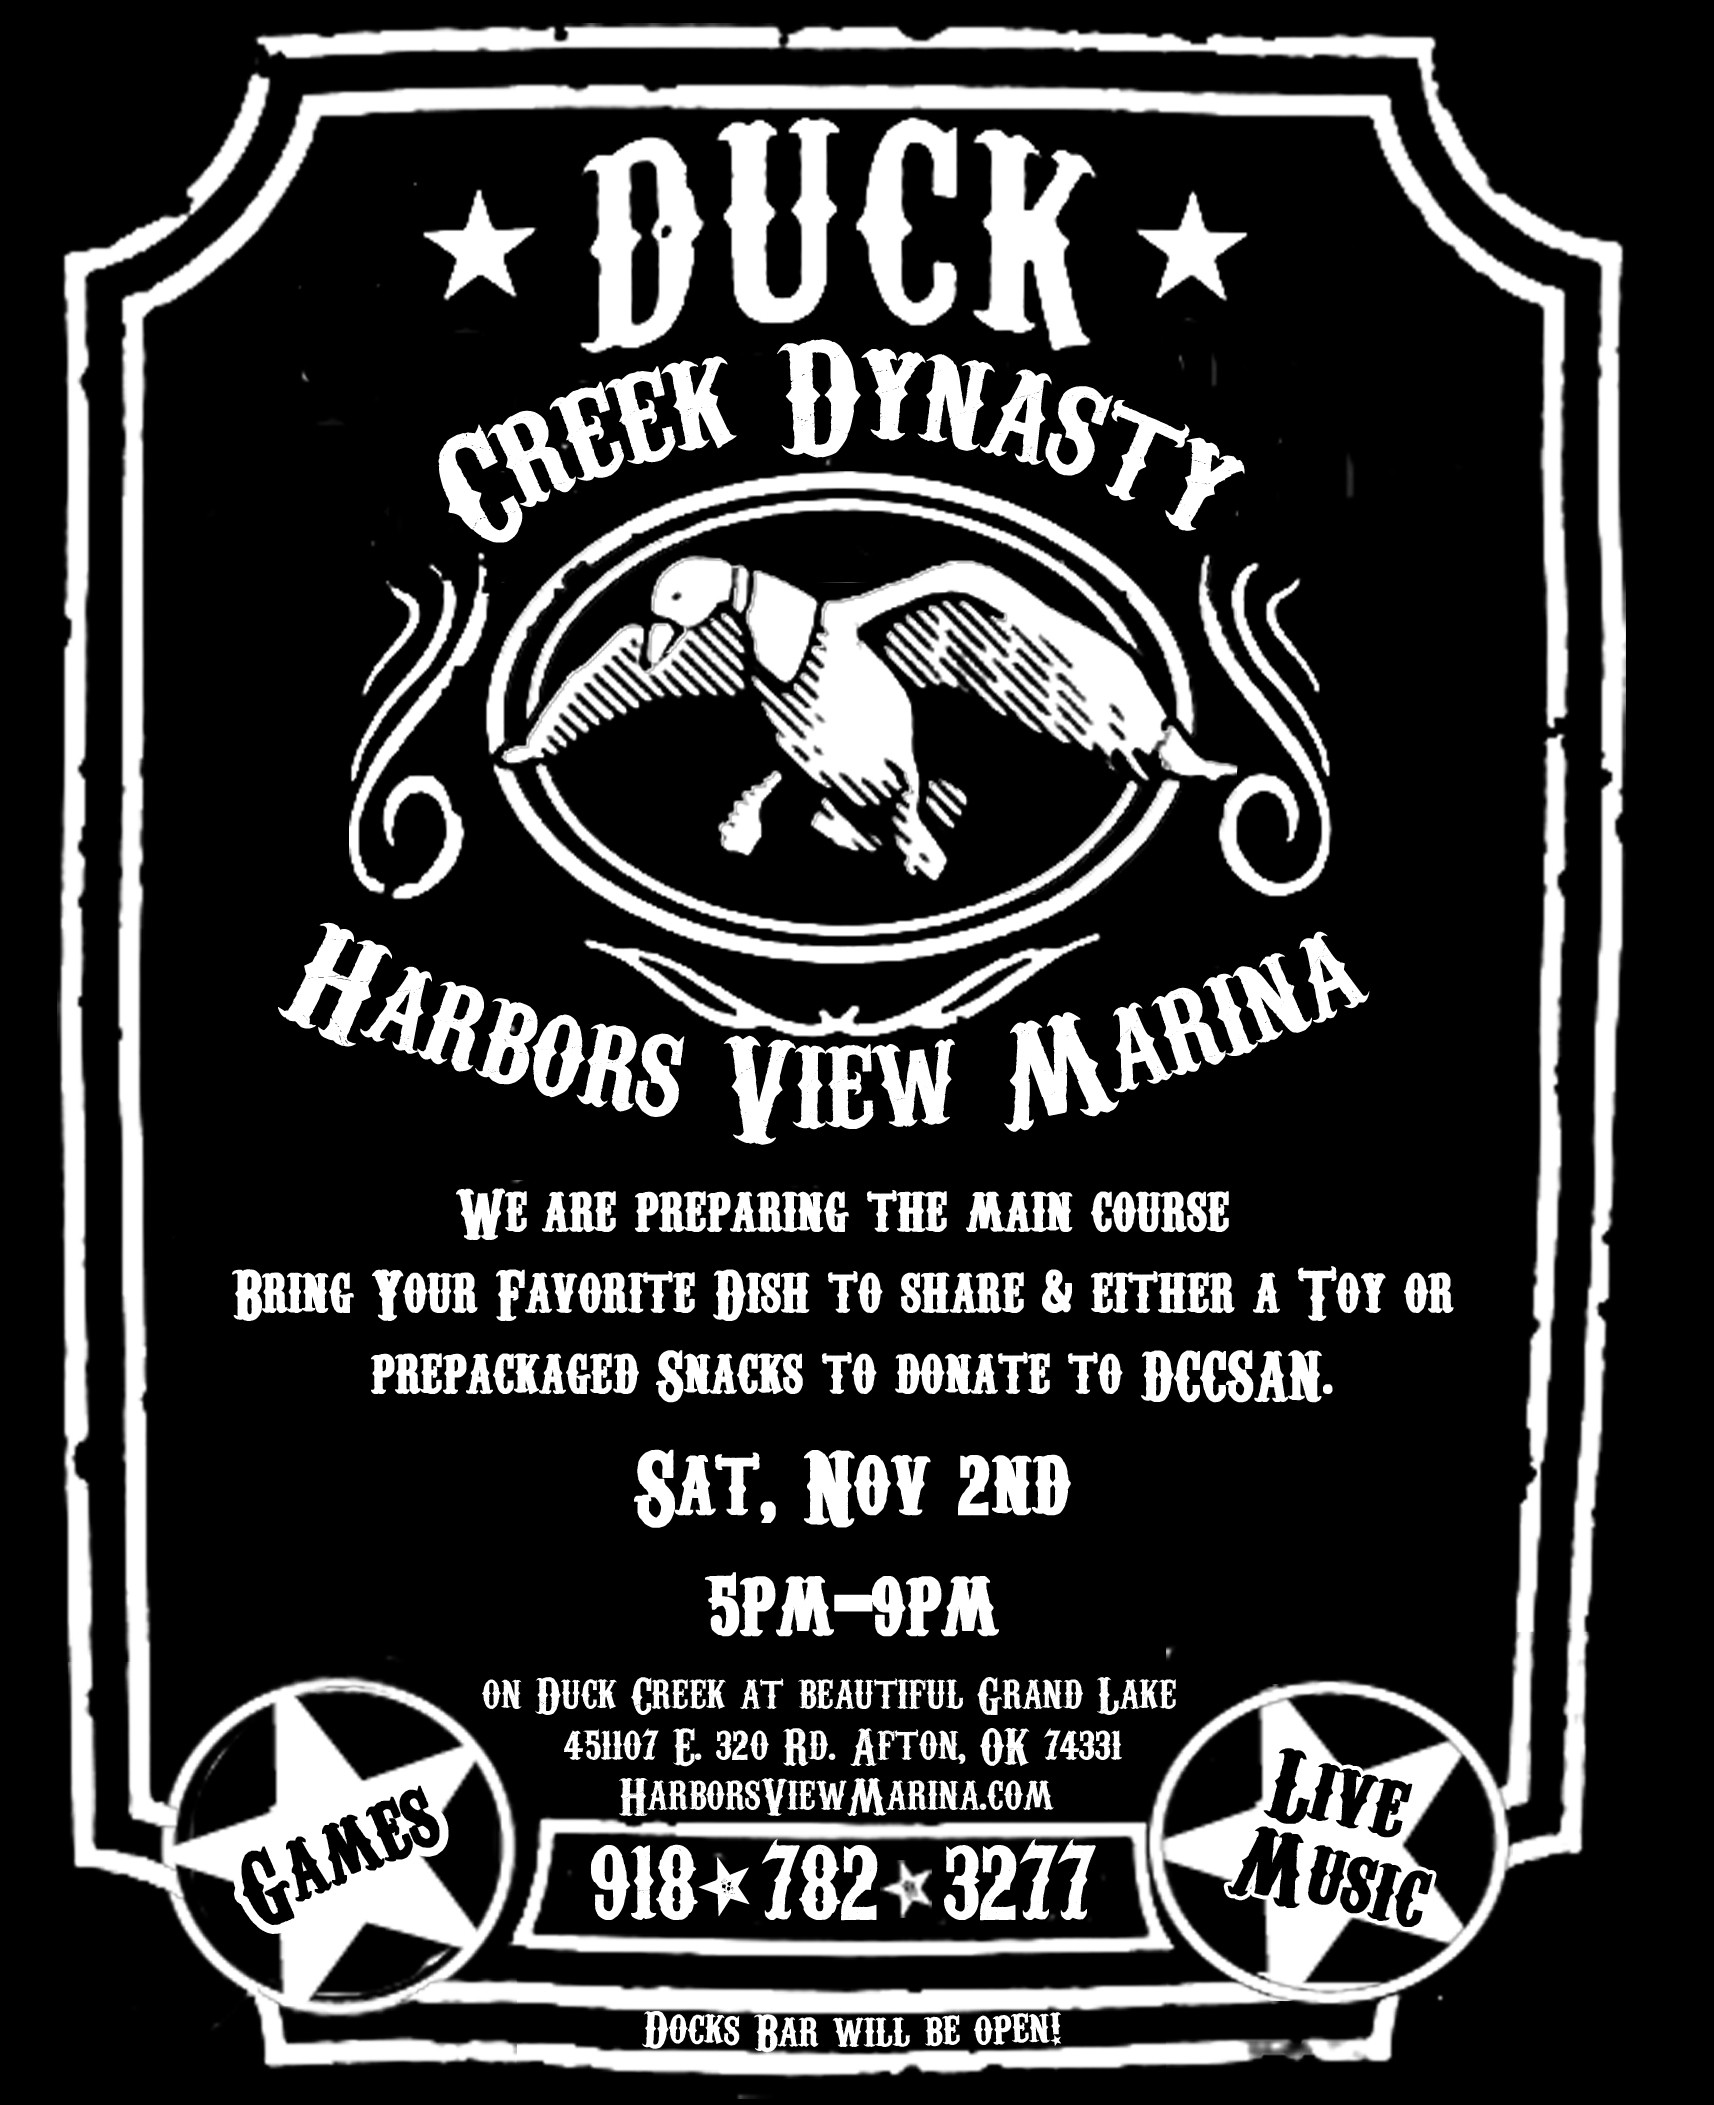 1714x2105 AFTON, OK On opening day of duck hunting season, Harbors View Marina will  be hosting a Duck Creek Dynasty party on Nov. 2nd from 5-9 pm.